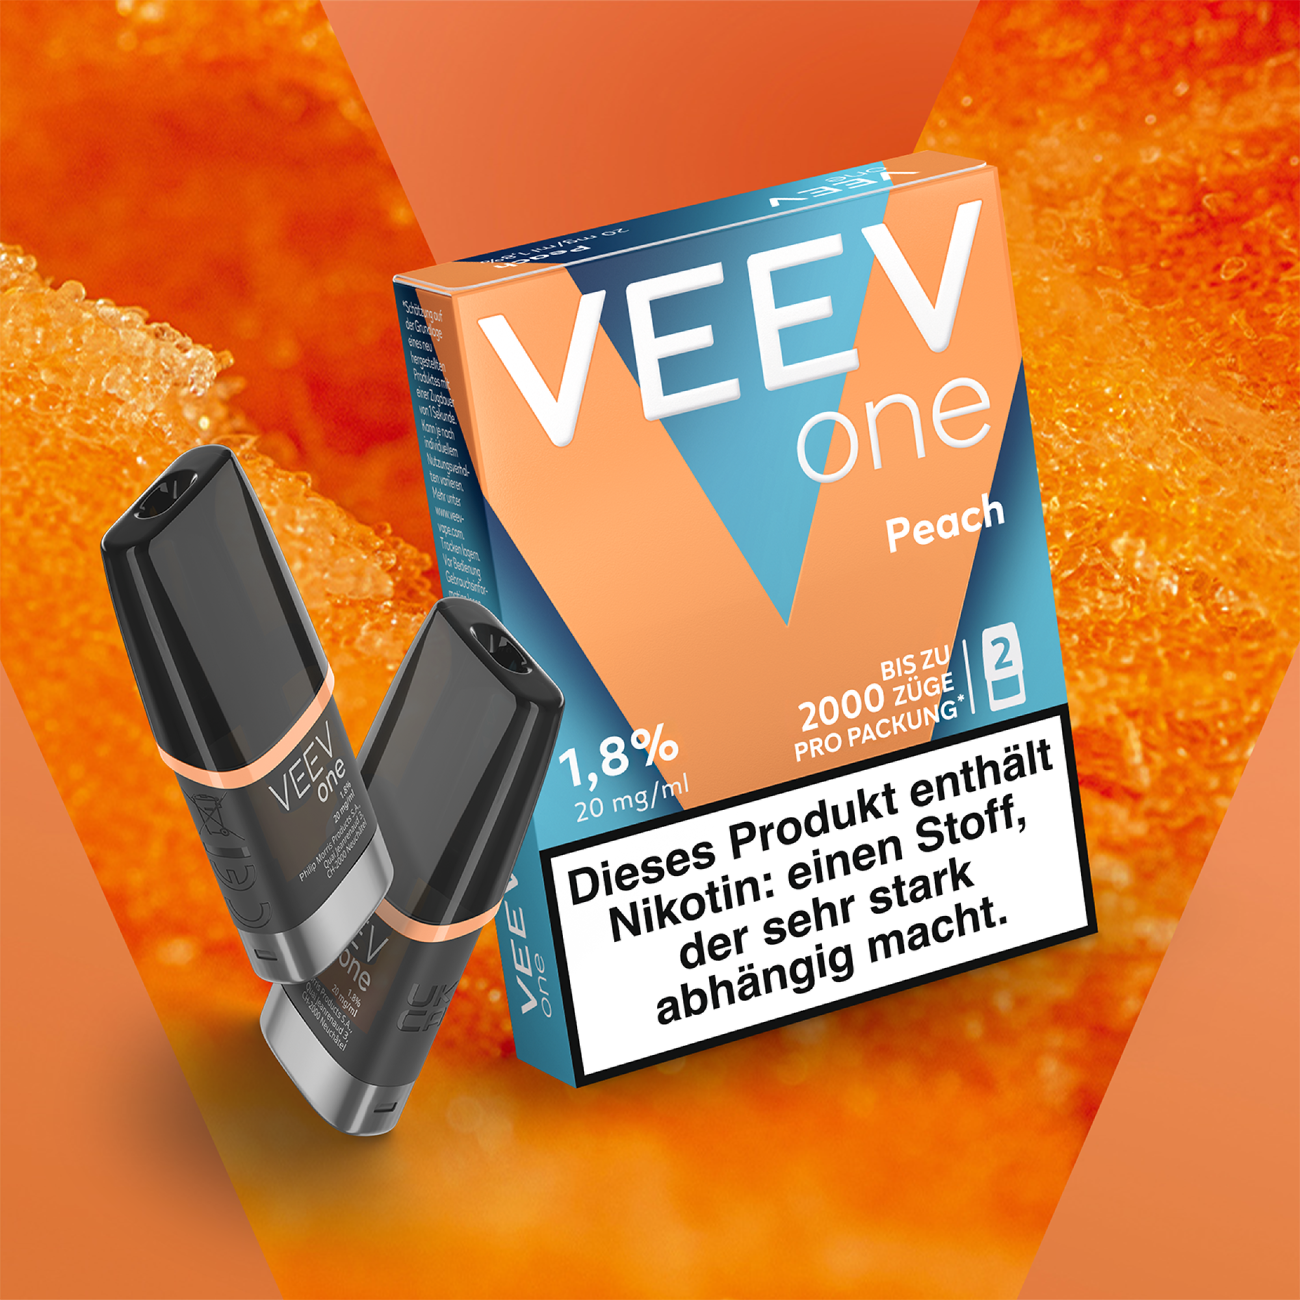 Veev One Pods - Peach